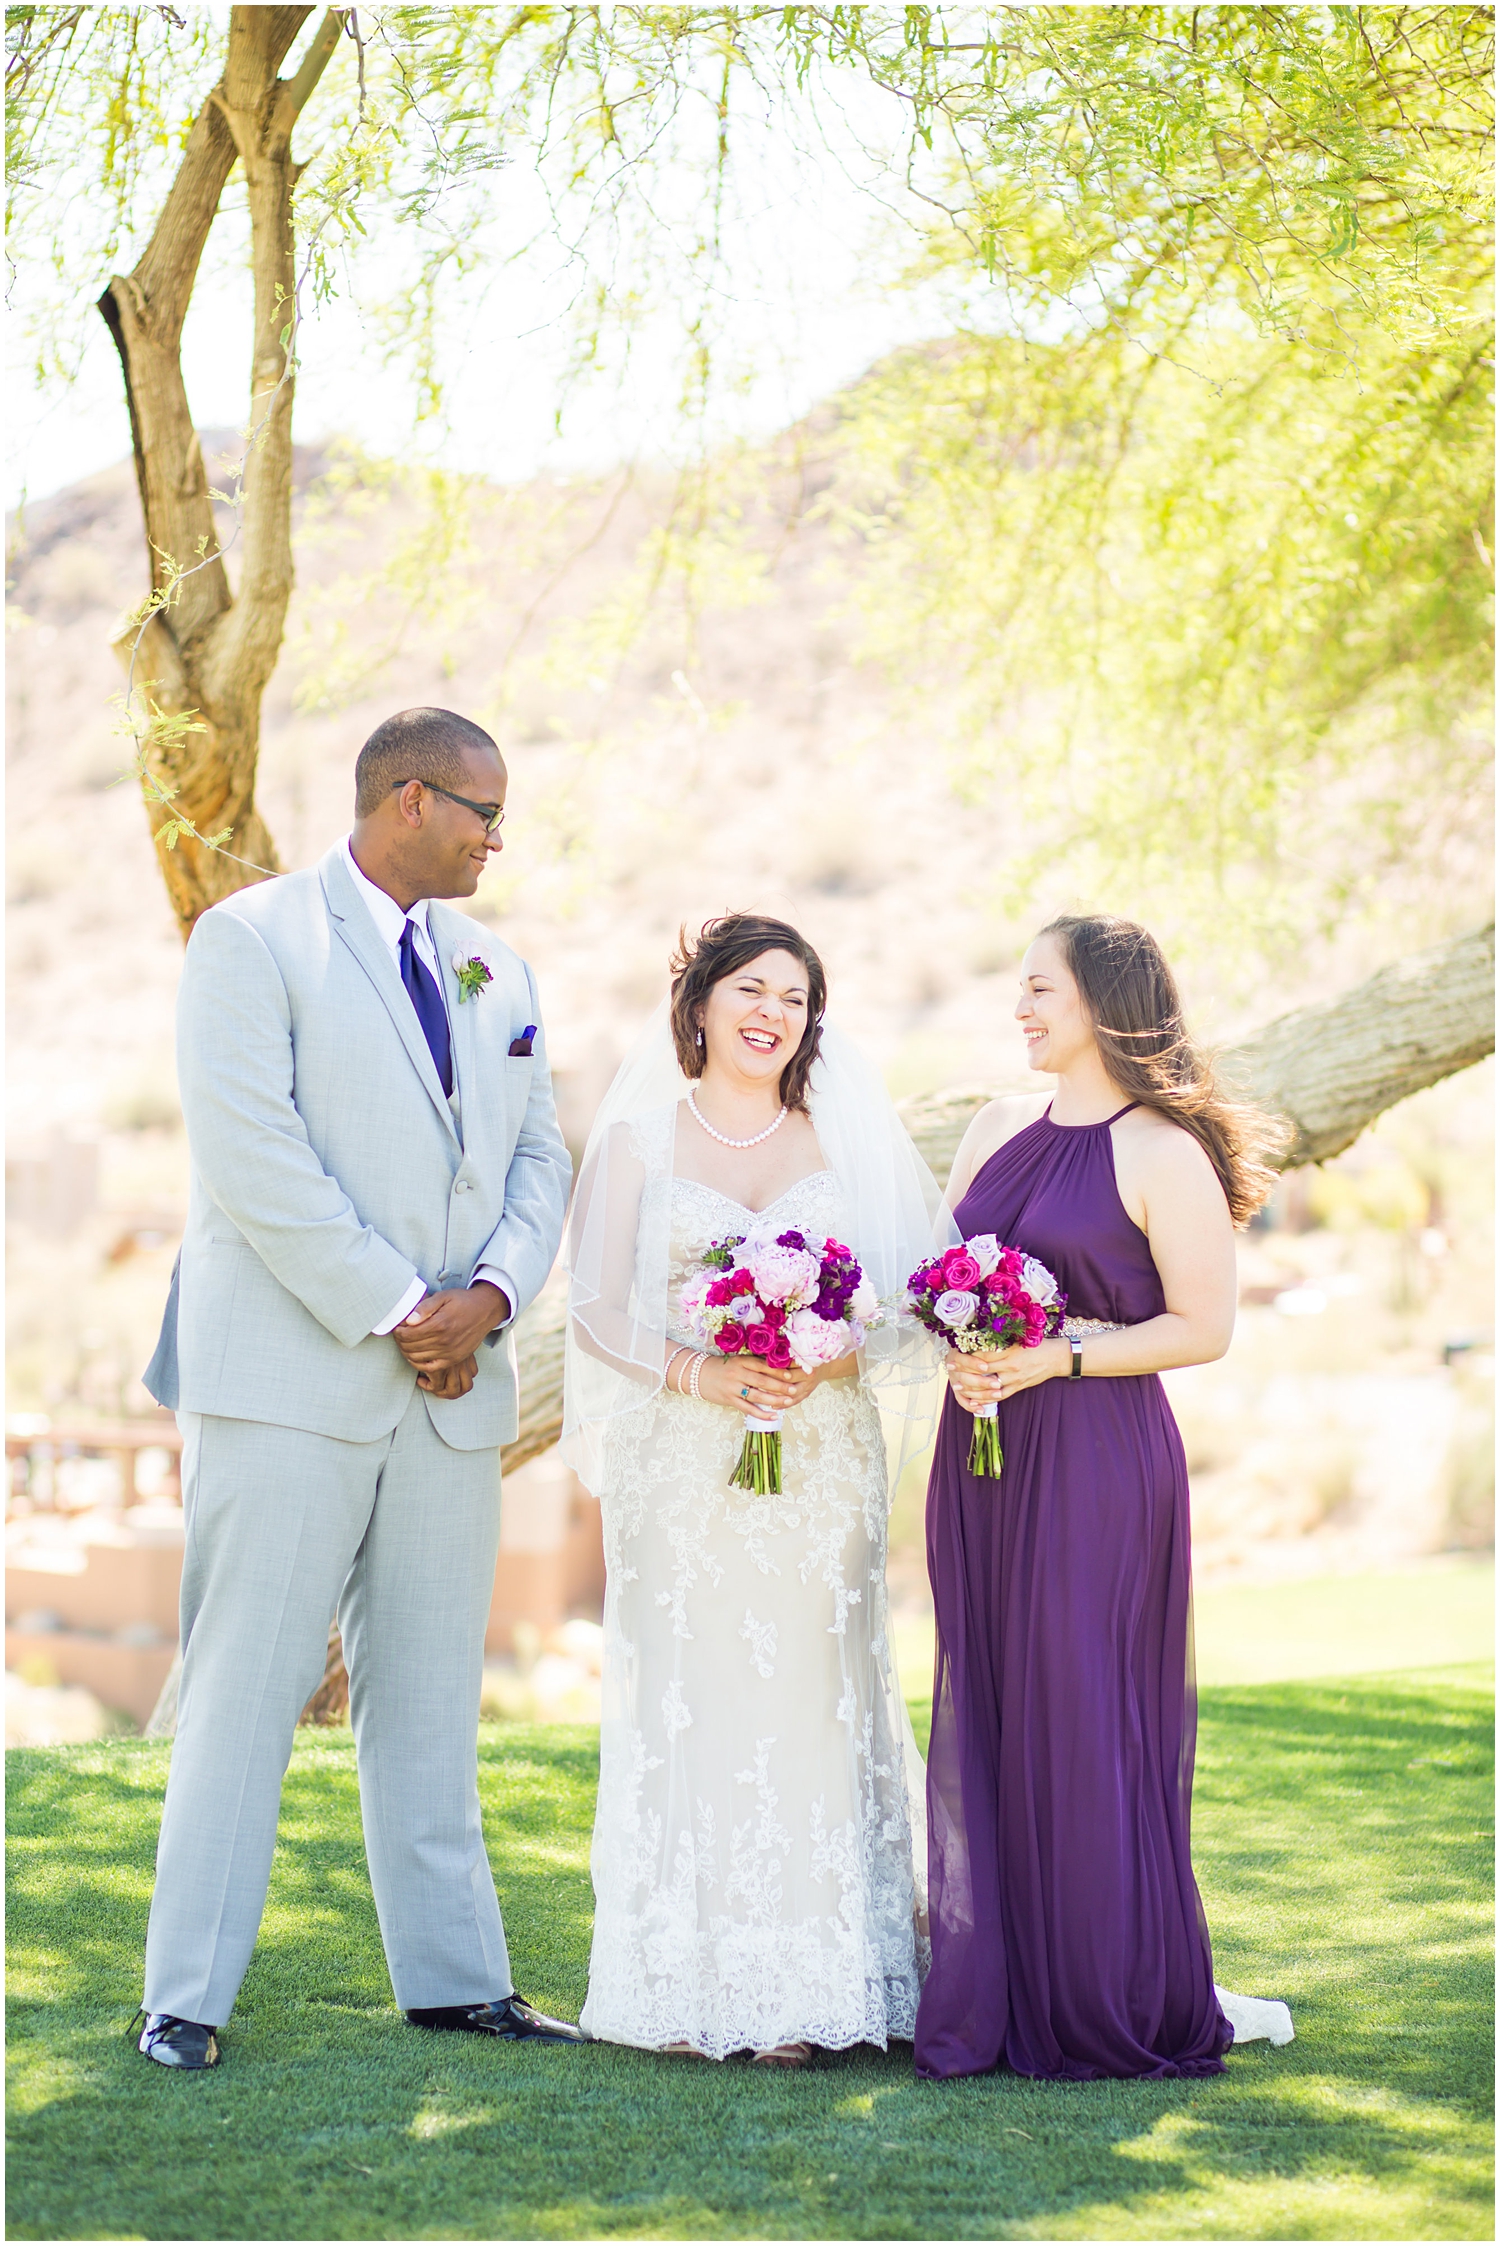 bride in strapless dress with veil and purple lavender peony and rose bouquet with bridesmaid in dark purple maxi dress and bridesman in light grey suit wedding party